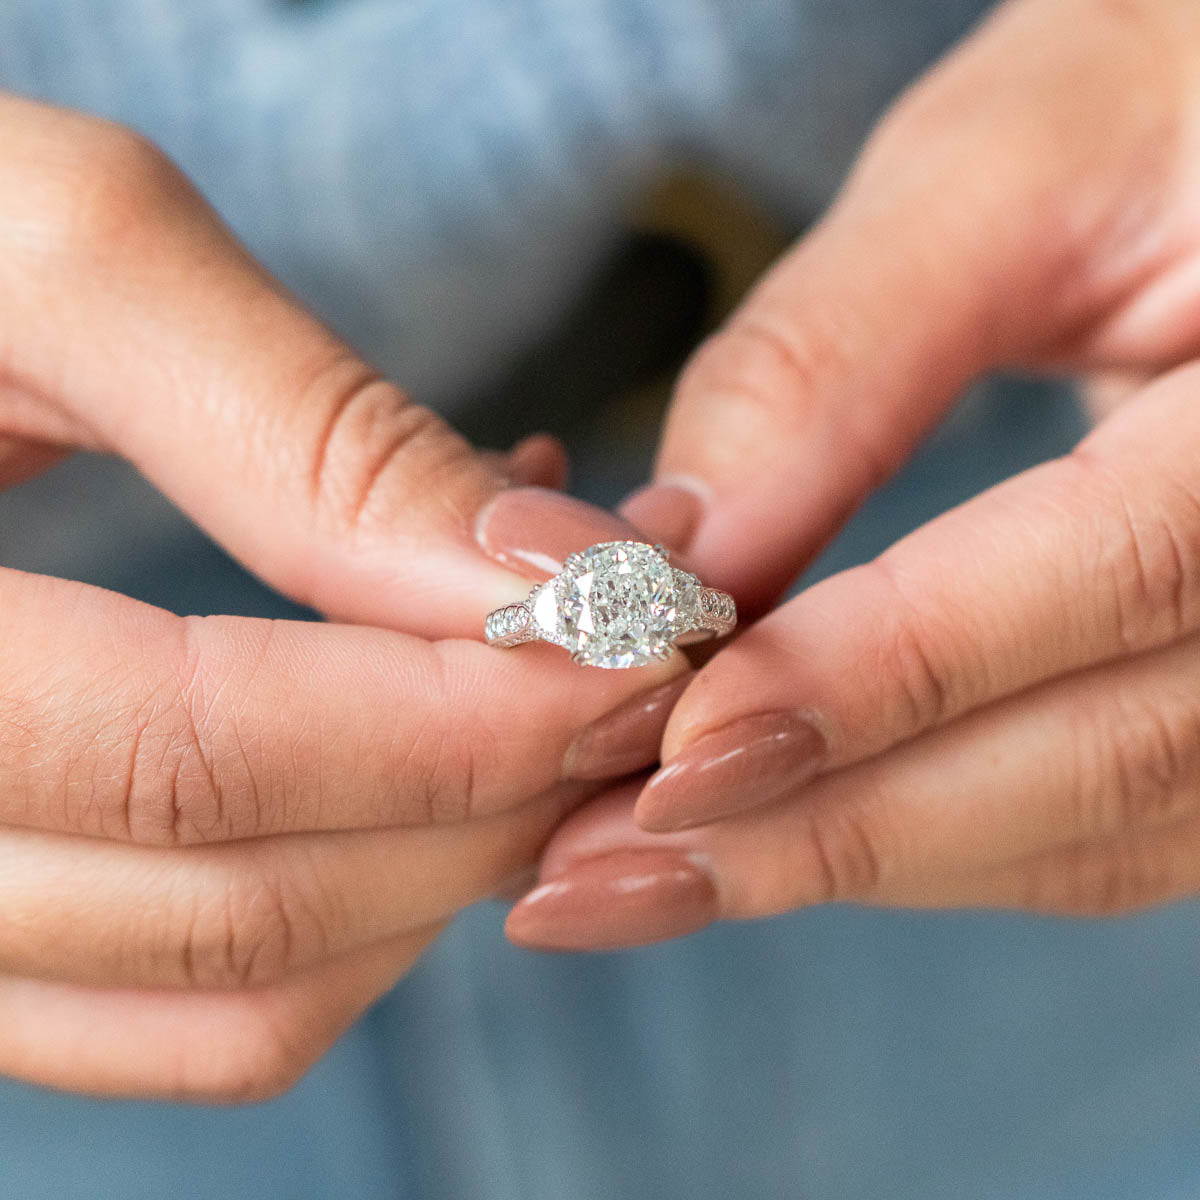 What to Do if the Diamond Falls Out of Your Ring